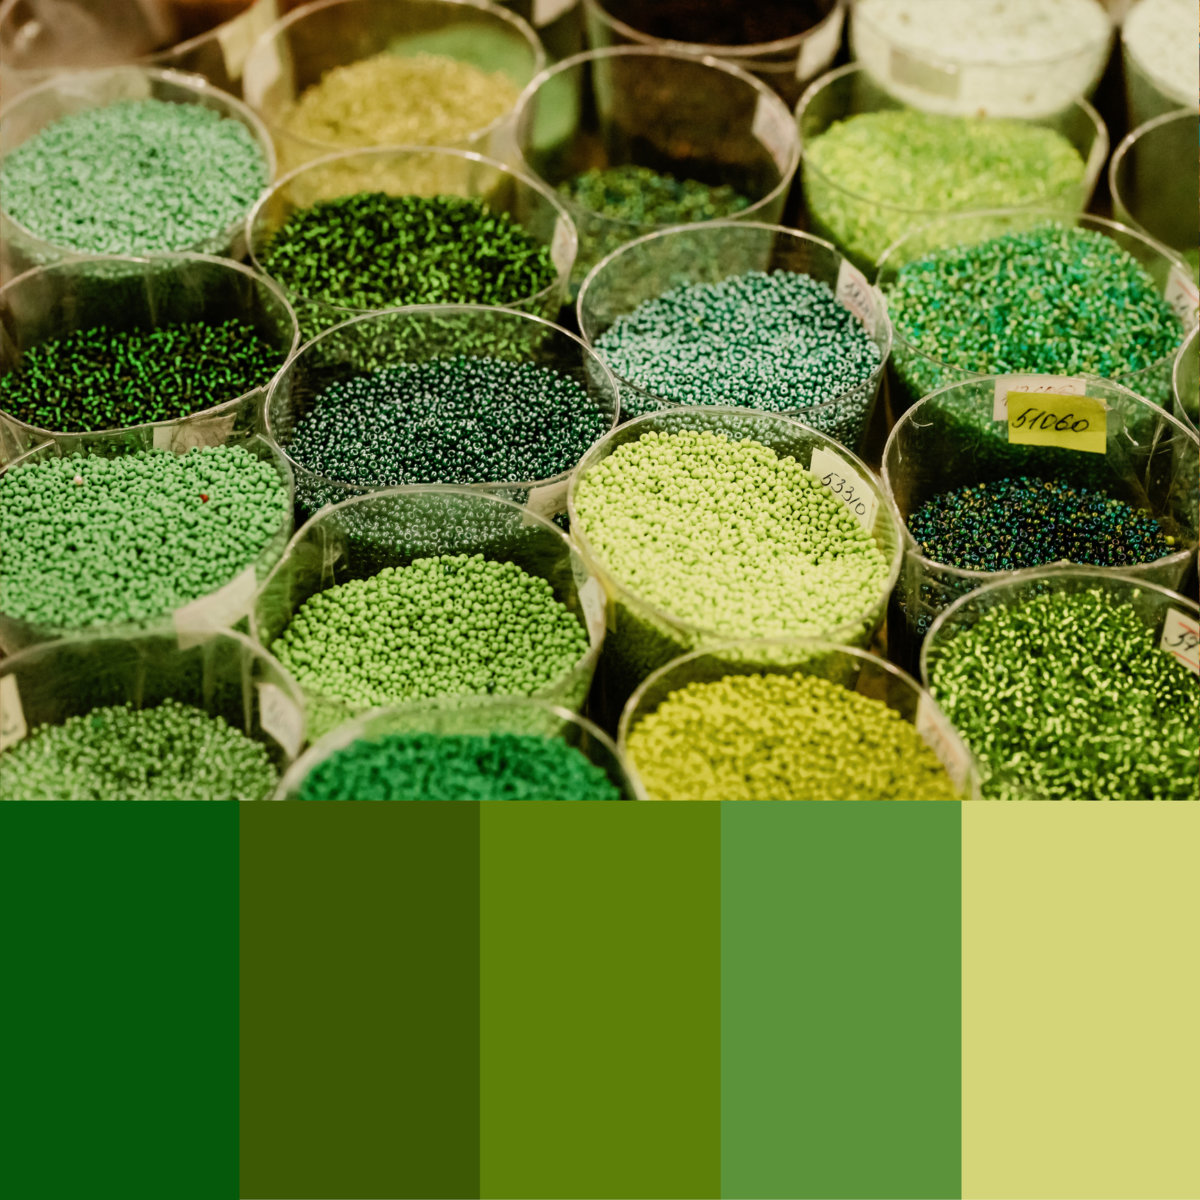 Kids can learn about the many shades of green in honor of St. Paddy's Day